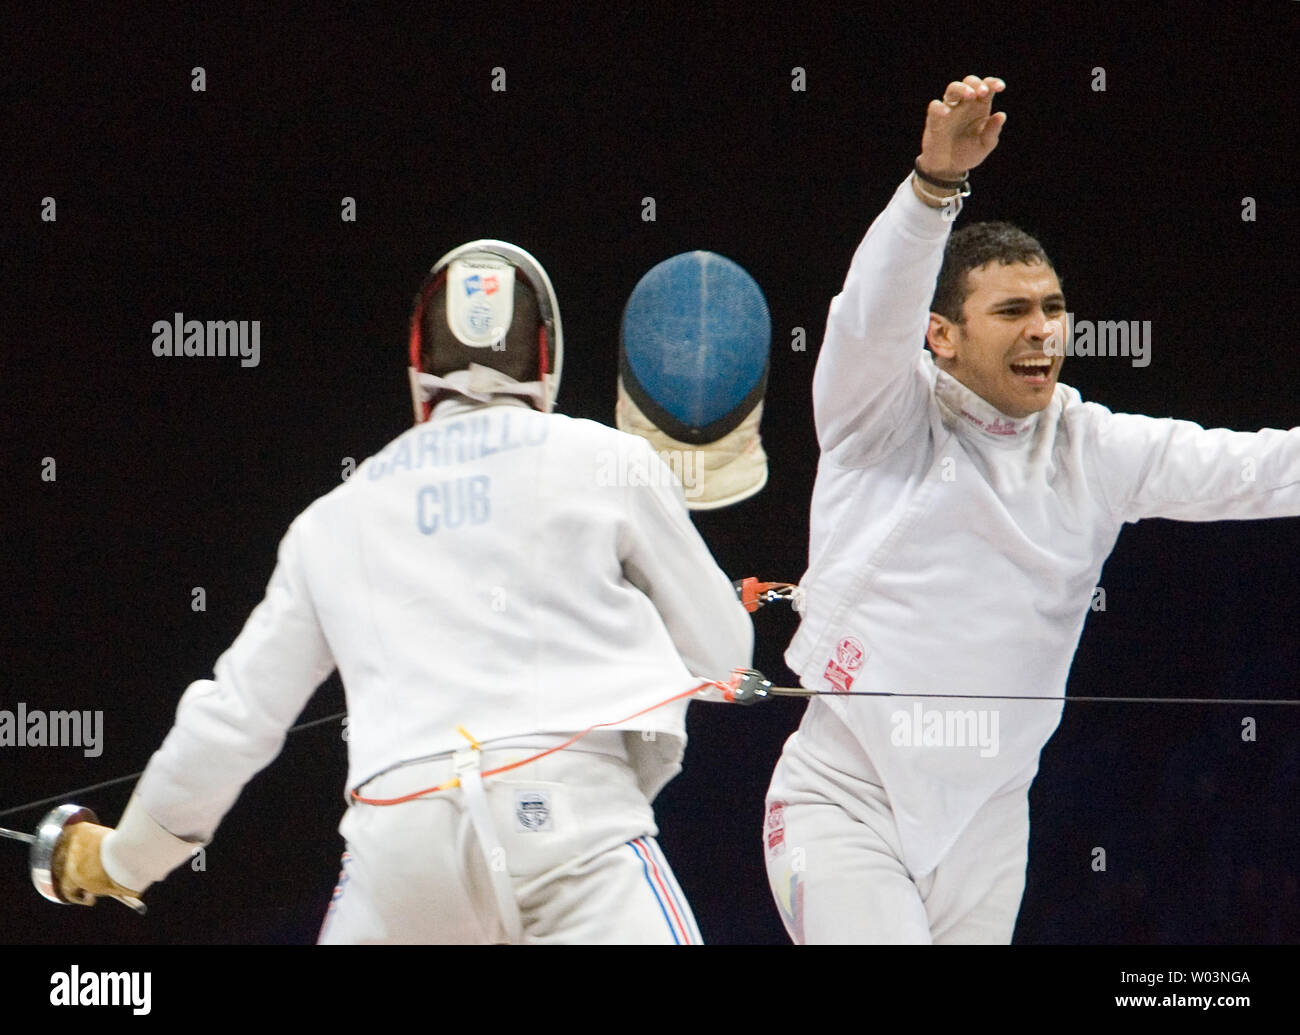 Venezuela's Reuben Limardo (R) celebrates after beating Cuba's Andres Carrillo 11-10 in overtime, winning gold in men's individual epee at Riocentro during the 2007 Pan Am Games in Rio de Janeiro, Brazil on July 16, 2007.   (UPI Photo/Heinz Ruckemann) Stock Photo